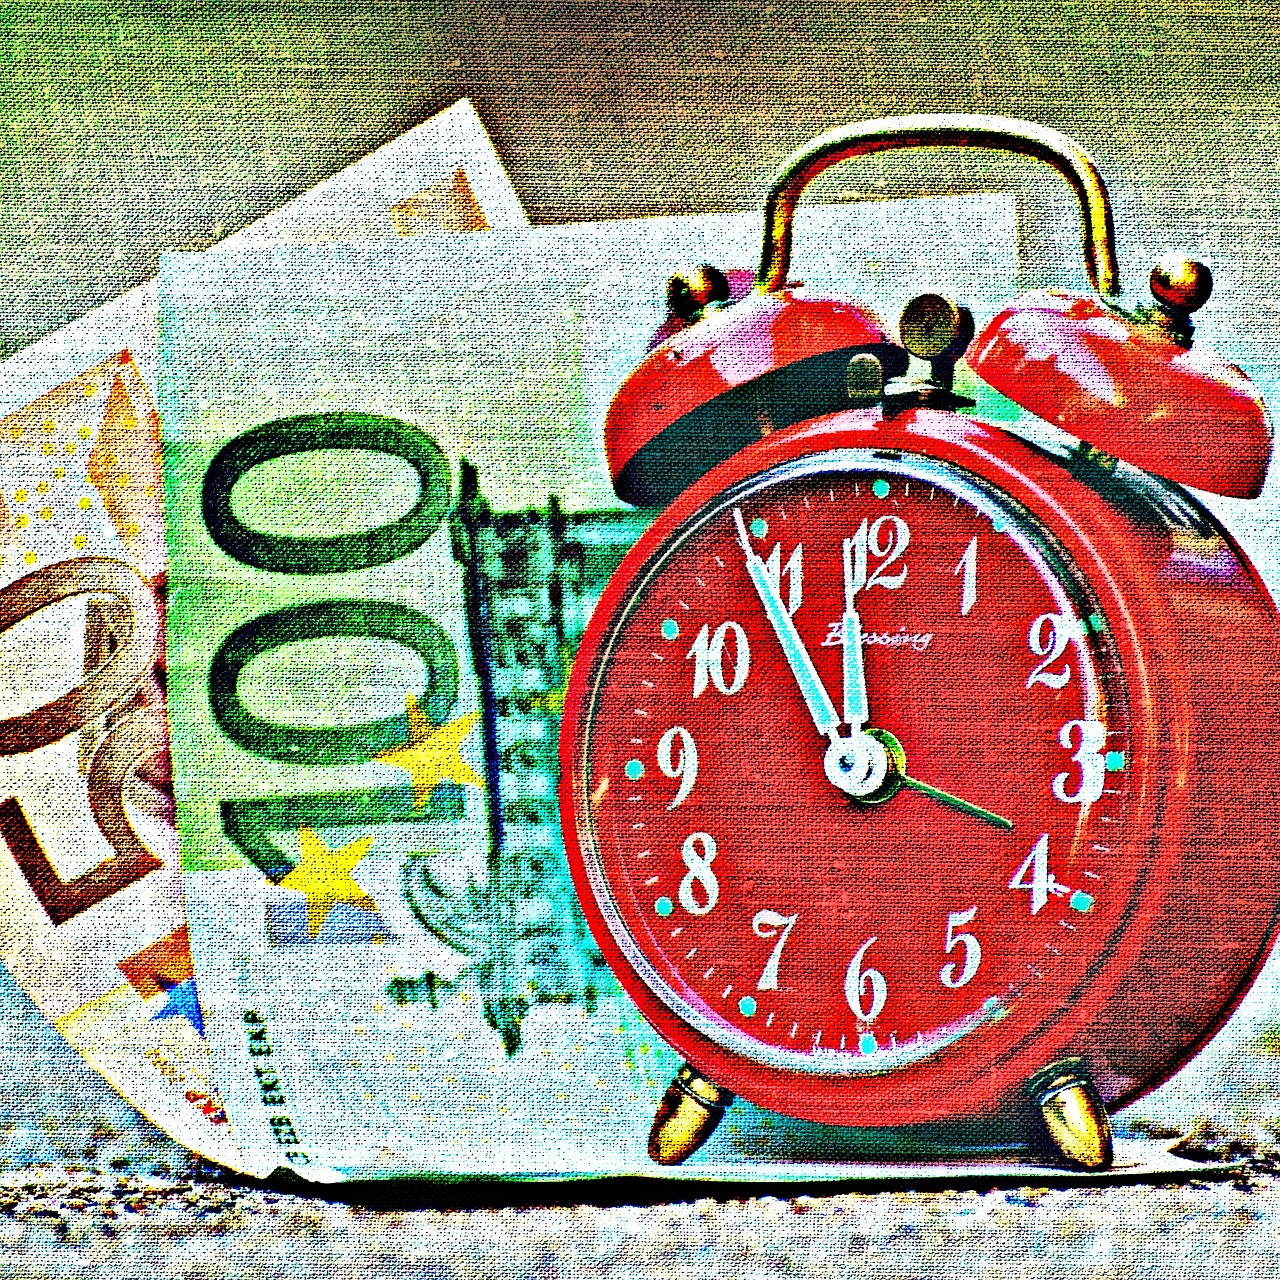 time is money the eleventh hour tissue free photo